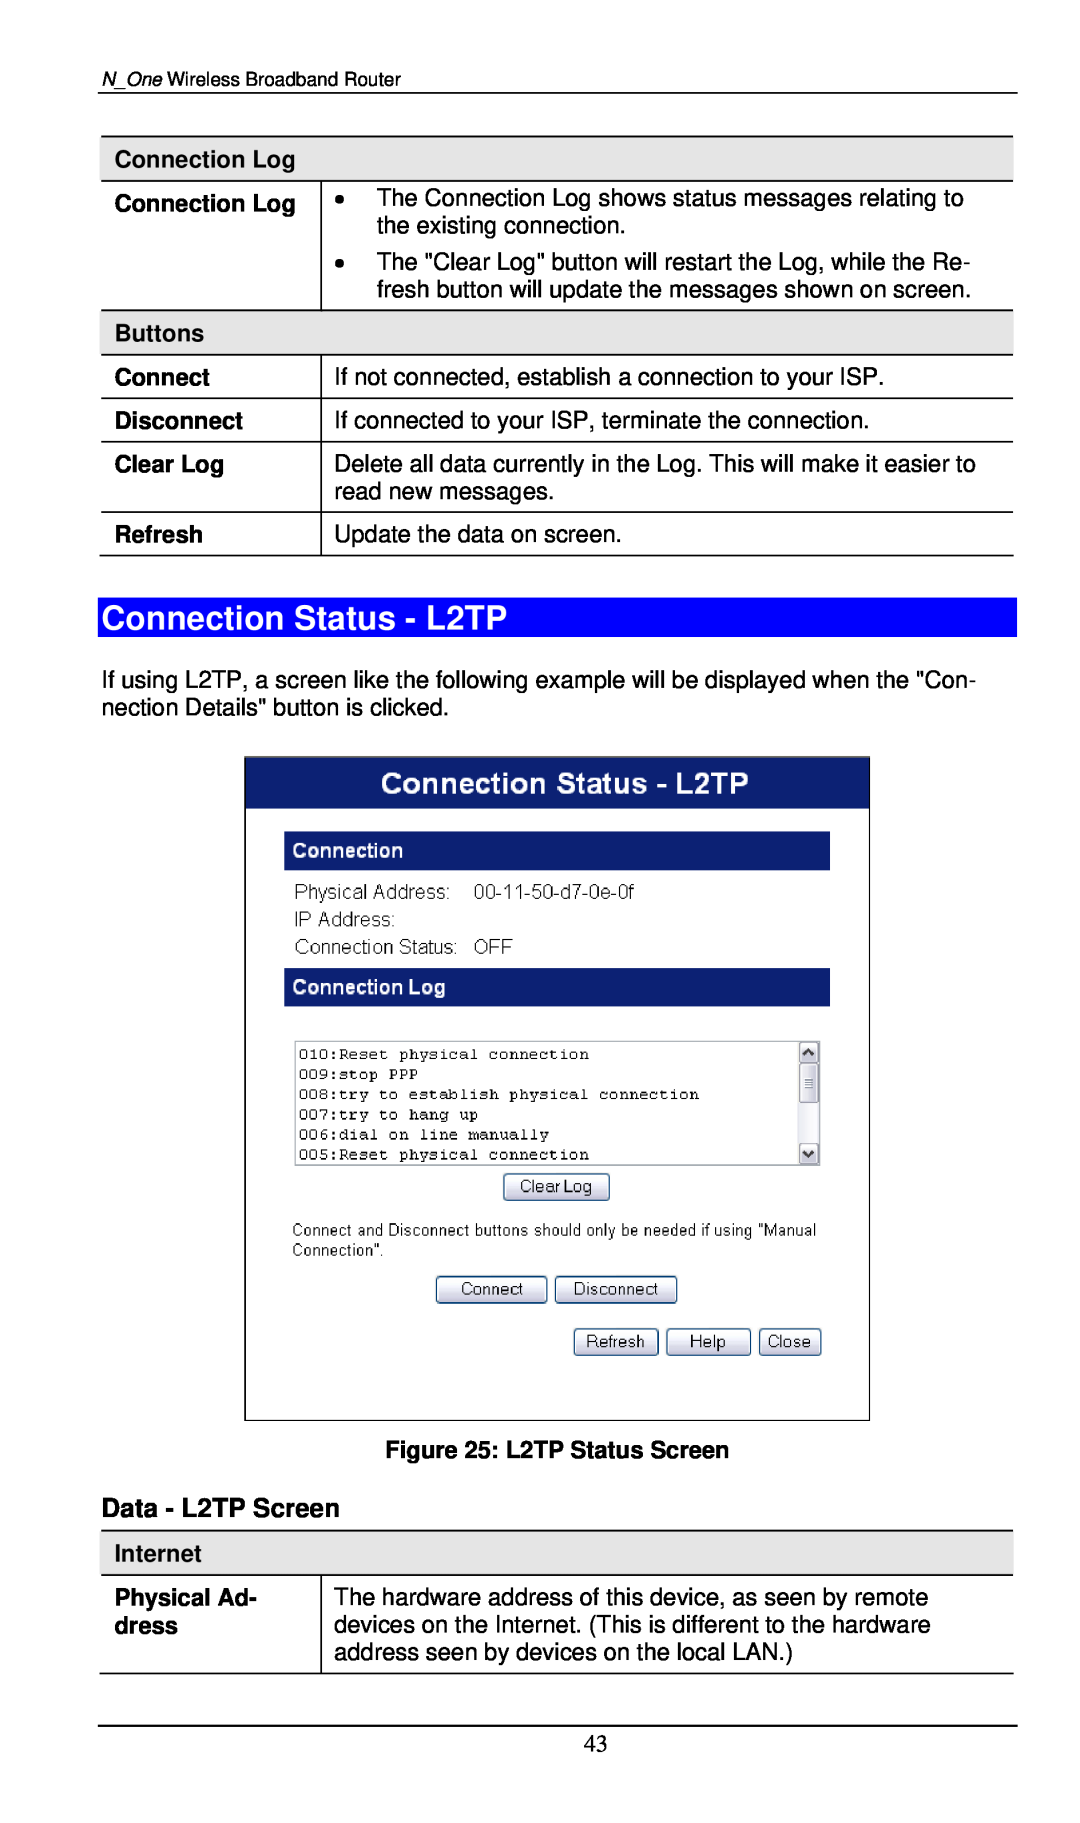 LevelOne WBR-6000 Connection Status - L2TP, Connection Log, Buttons, Disconnect, Clear Log, Refresh, L2TP Status Screen 